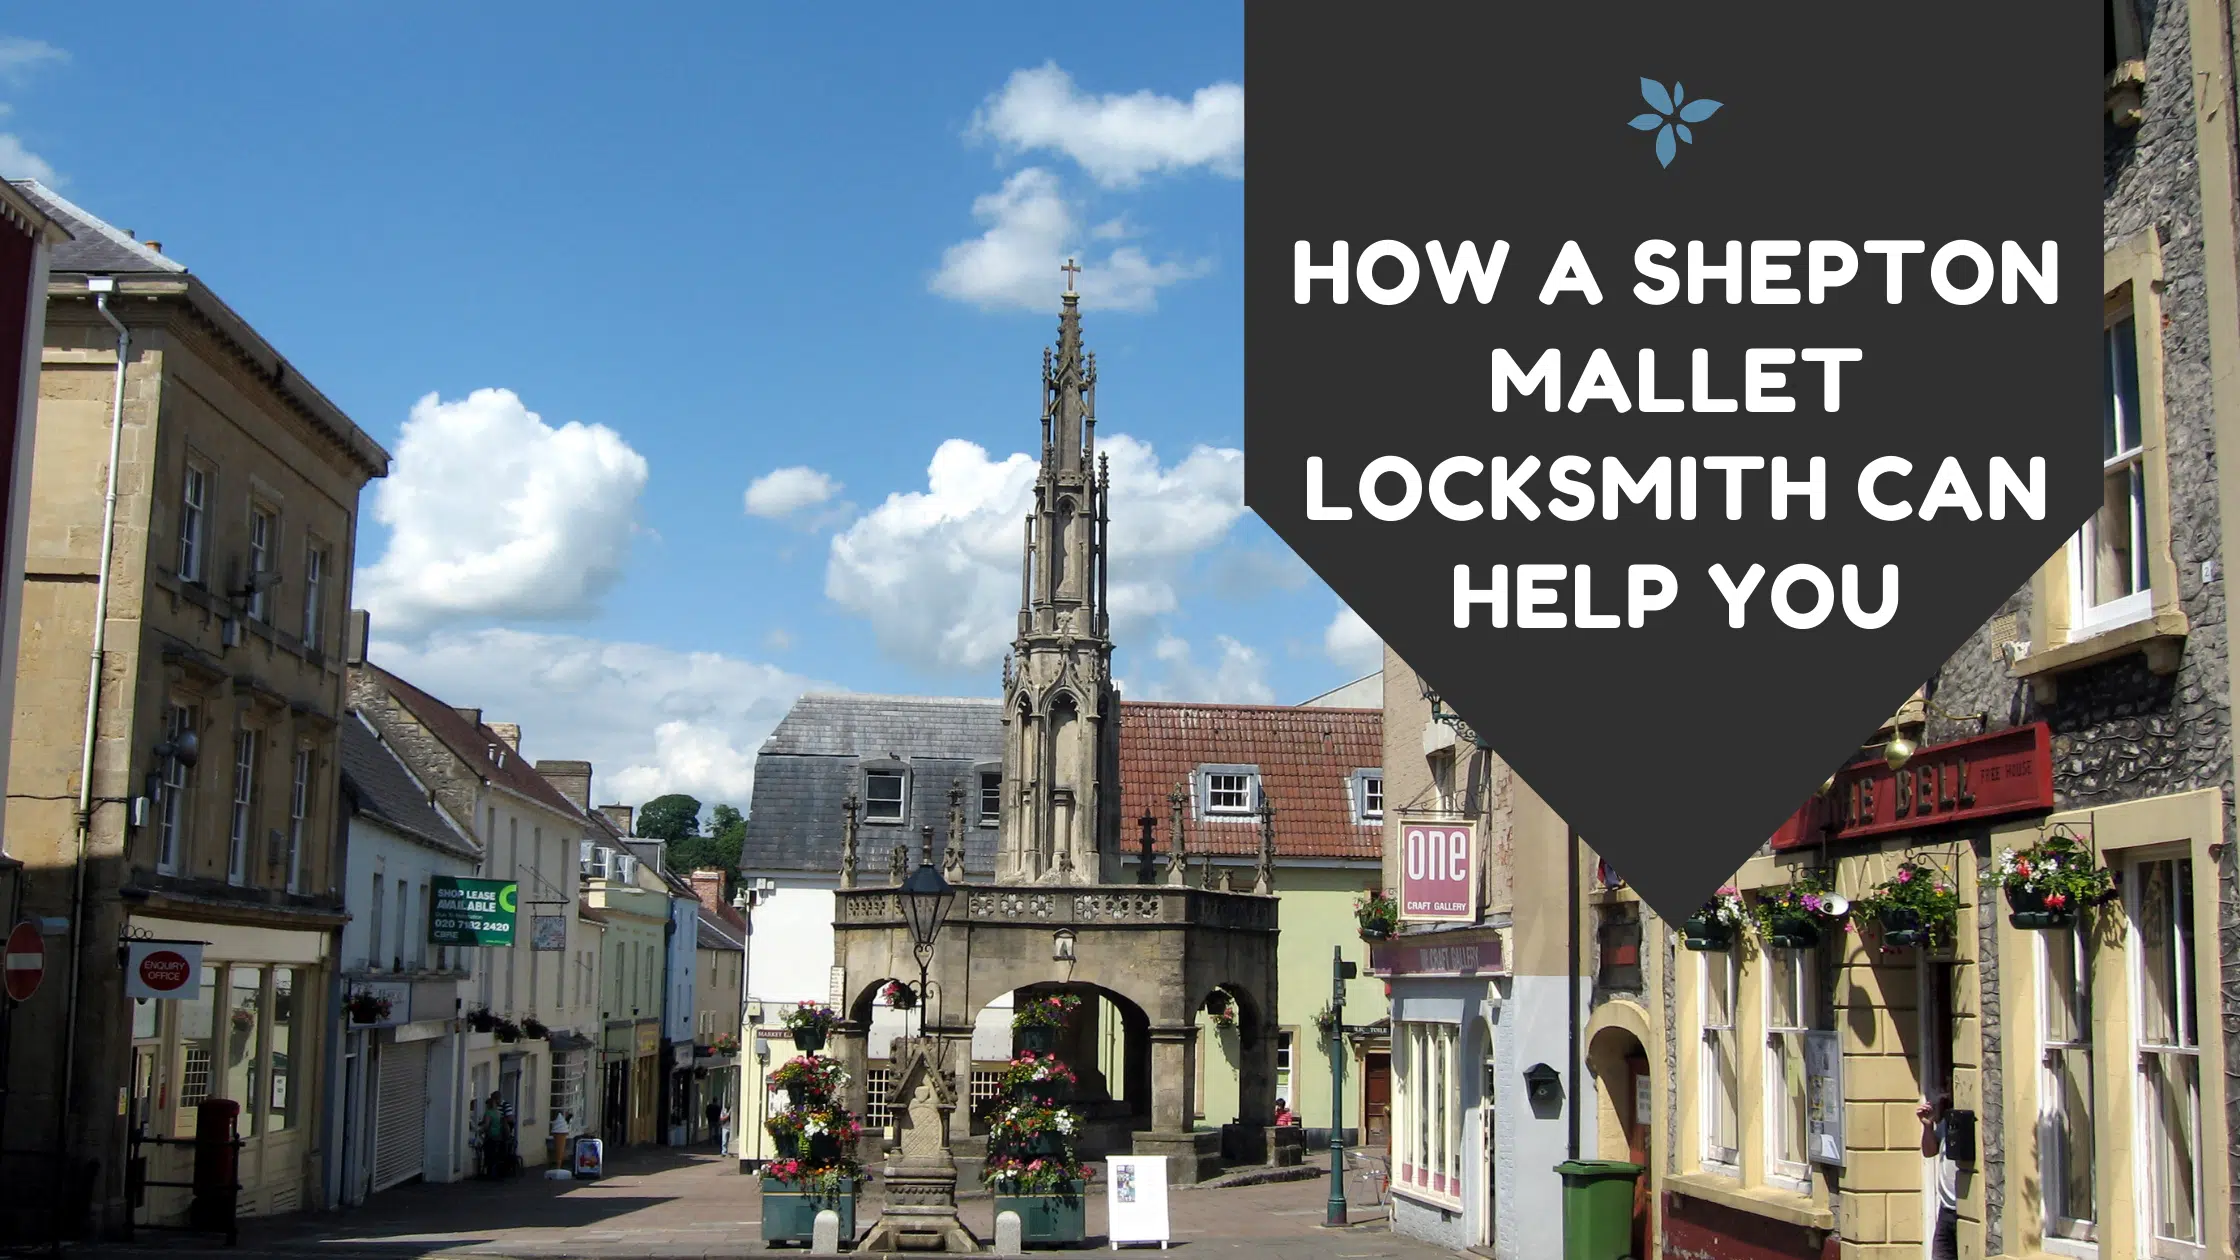 How A Shepton Mallet Locksmith Can Help You